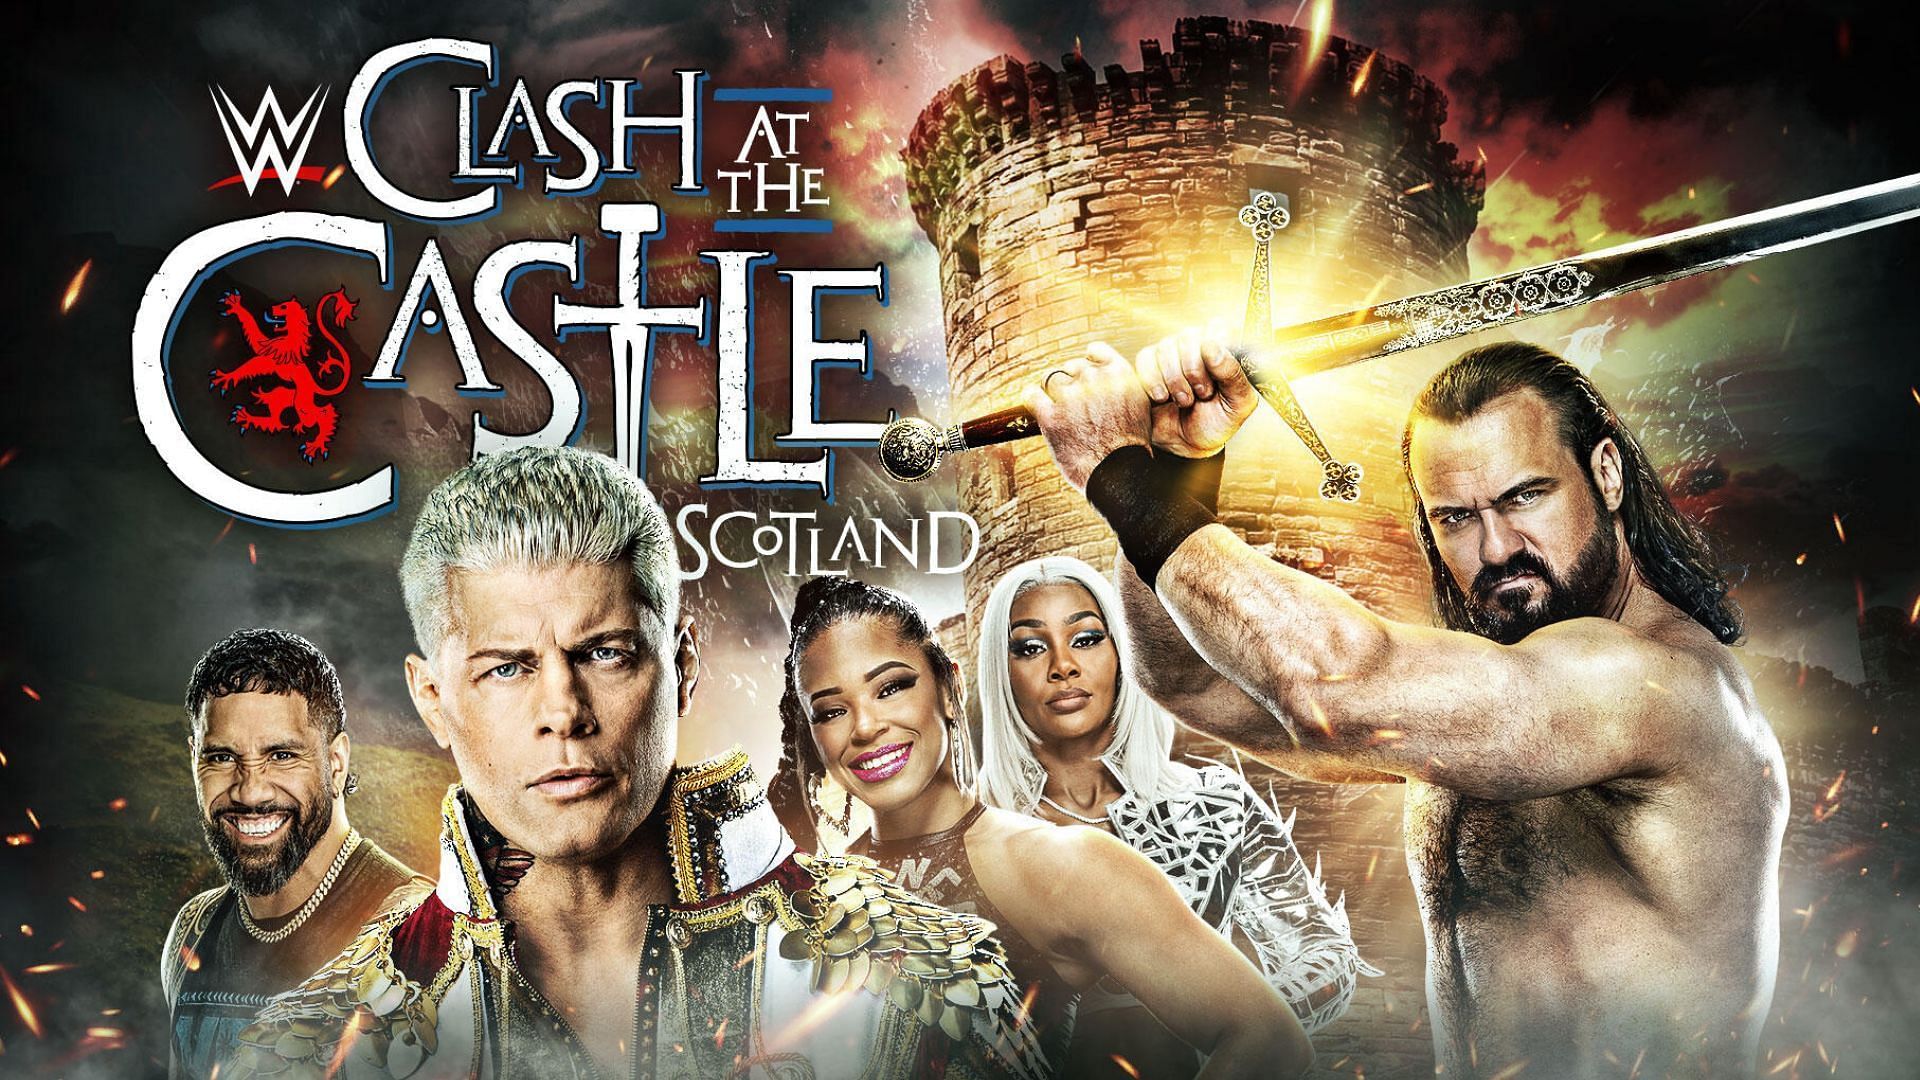 Clash at the Castle will air live in June.